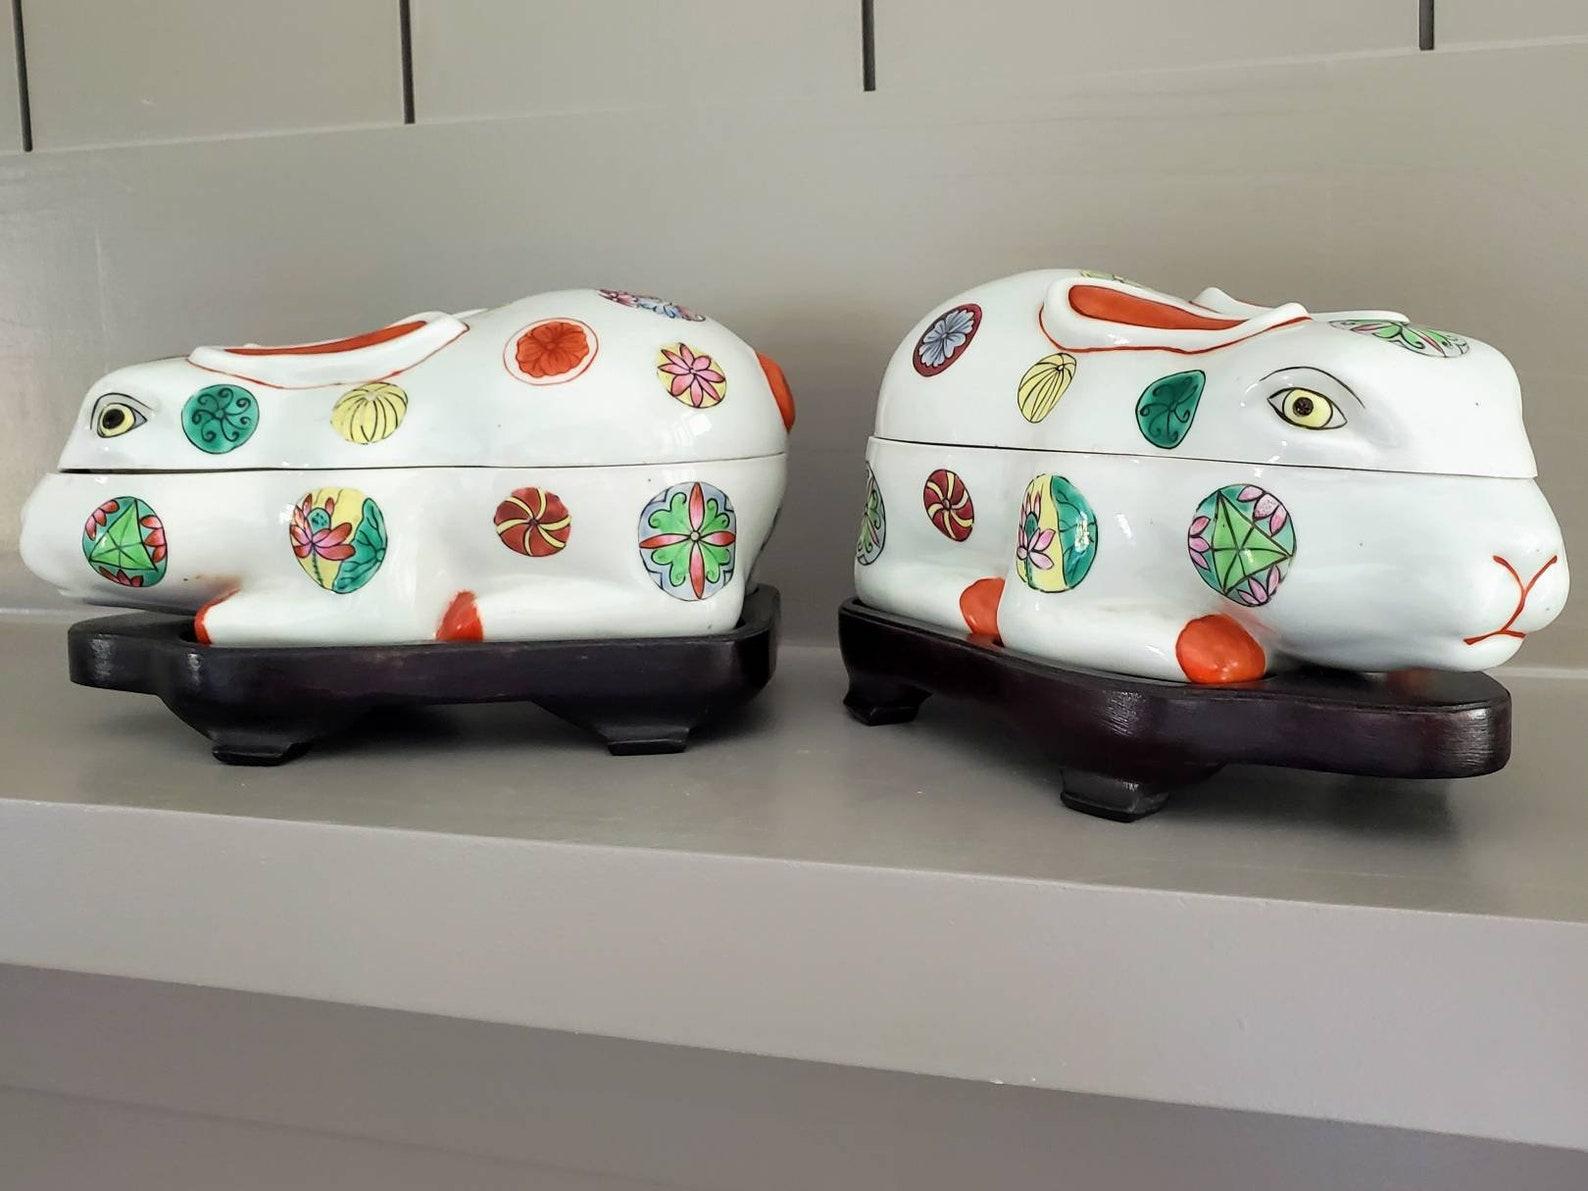 A fascinating pair of Japanese porcelain kogo (incense containers), crouching rabbit figures, hand painted, polychrome decorated with mon inspired symbols. The top half lifts off to reveal a spacious open interior. Resting on fitted wooden stands.